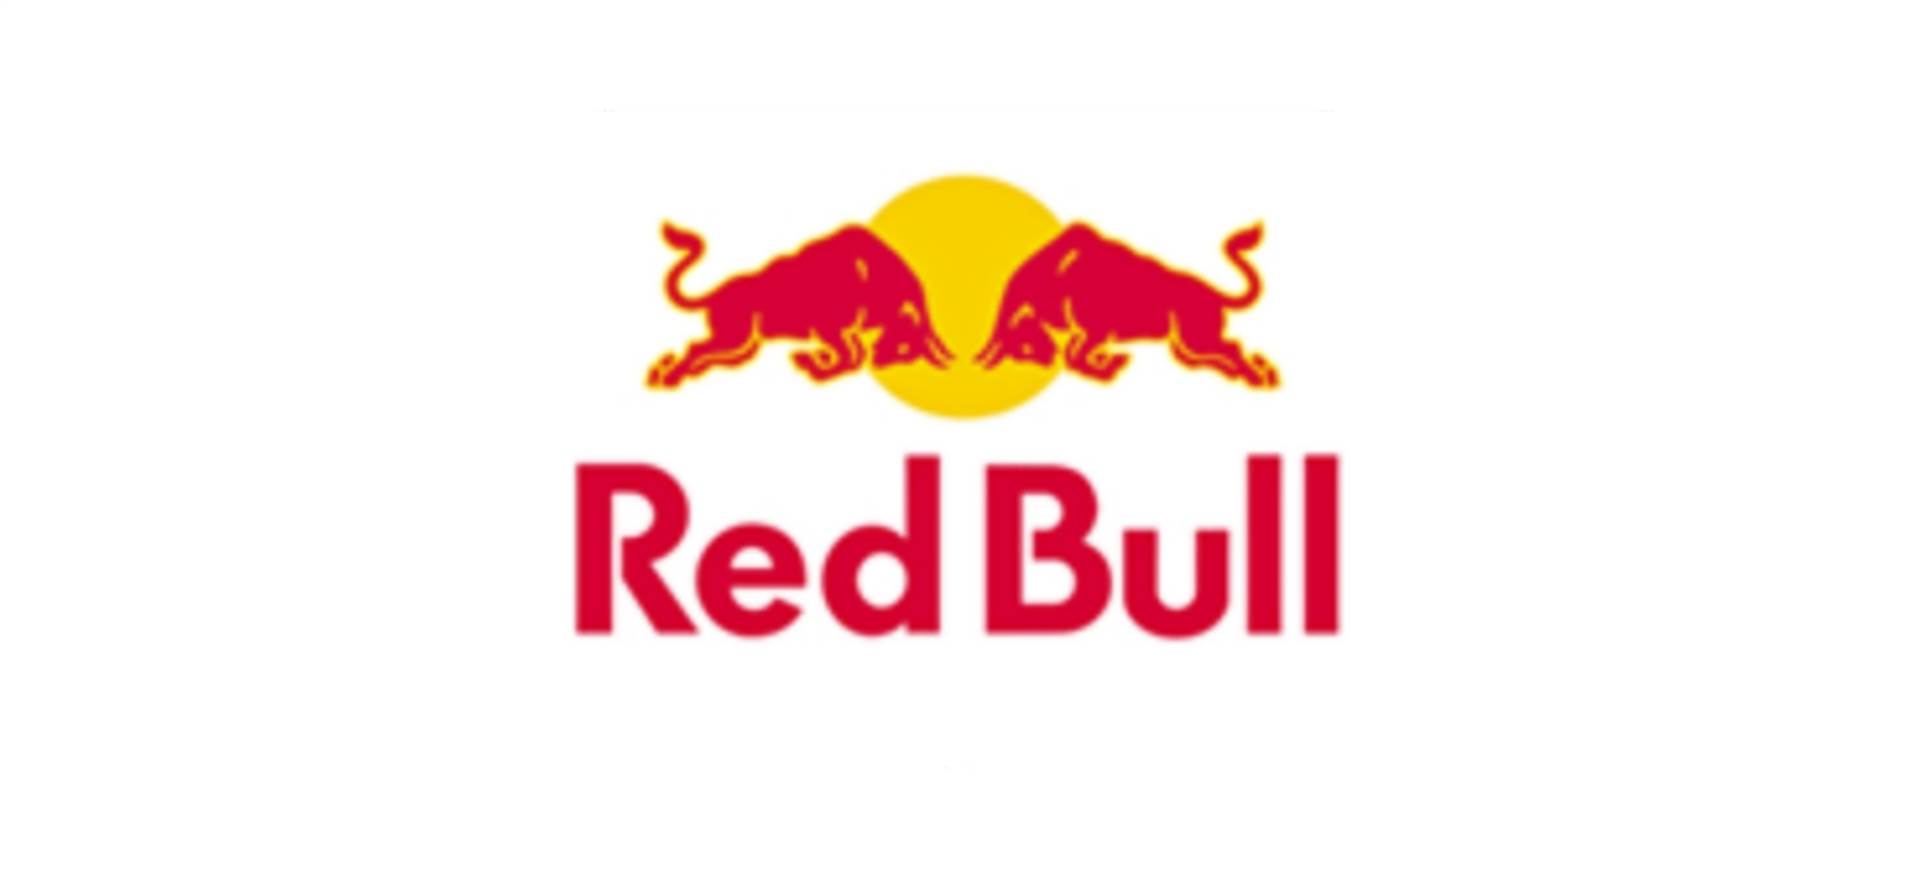 The Press release Red Bull is online!